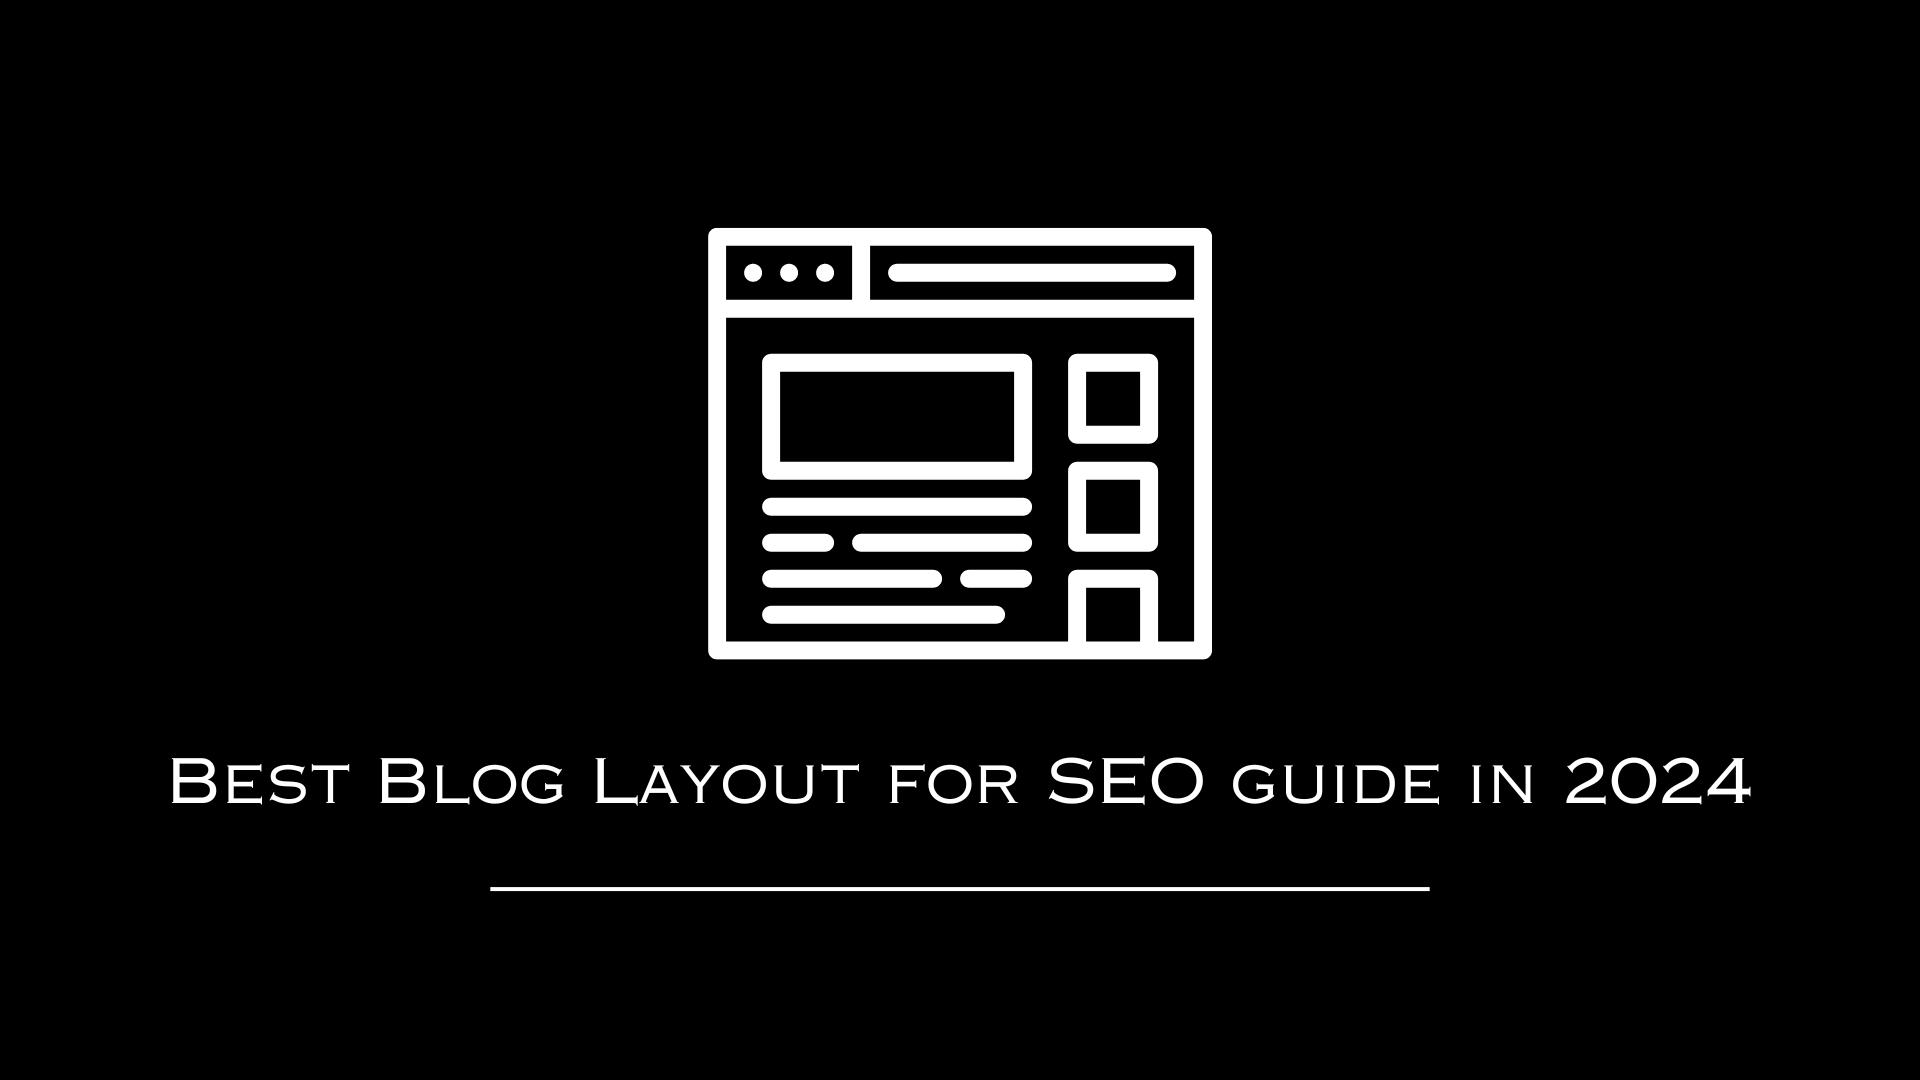 Best Blog Layout for SEO guide in 2024